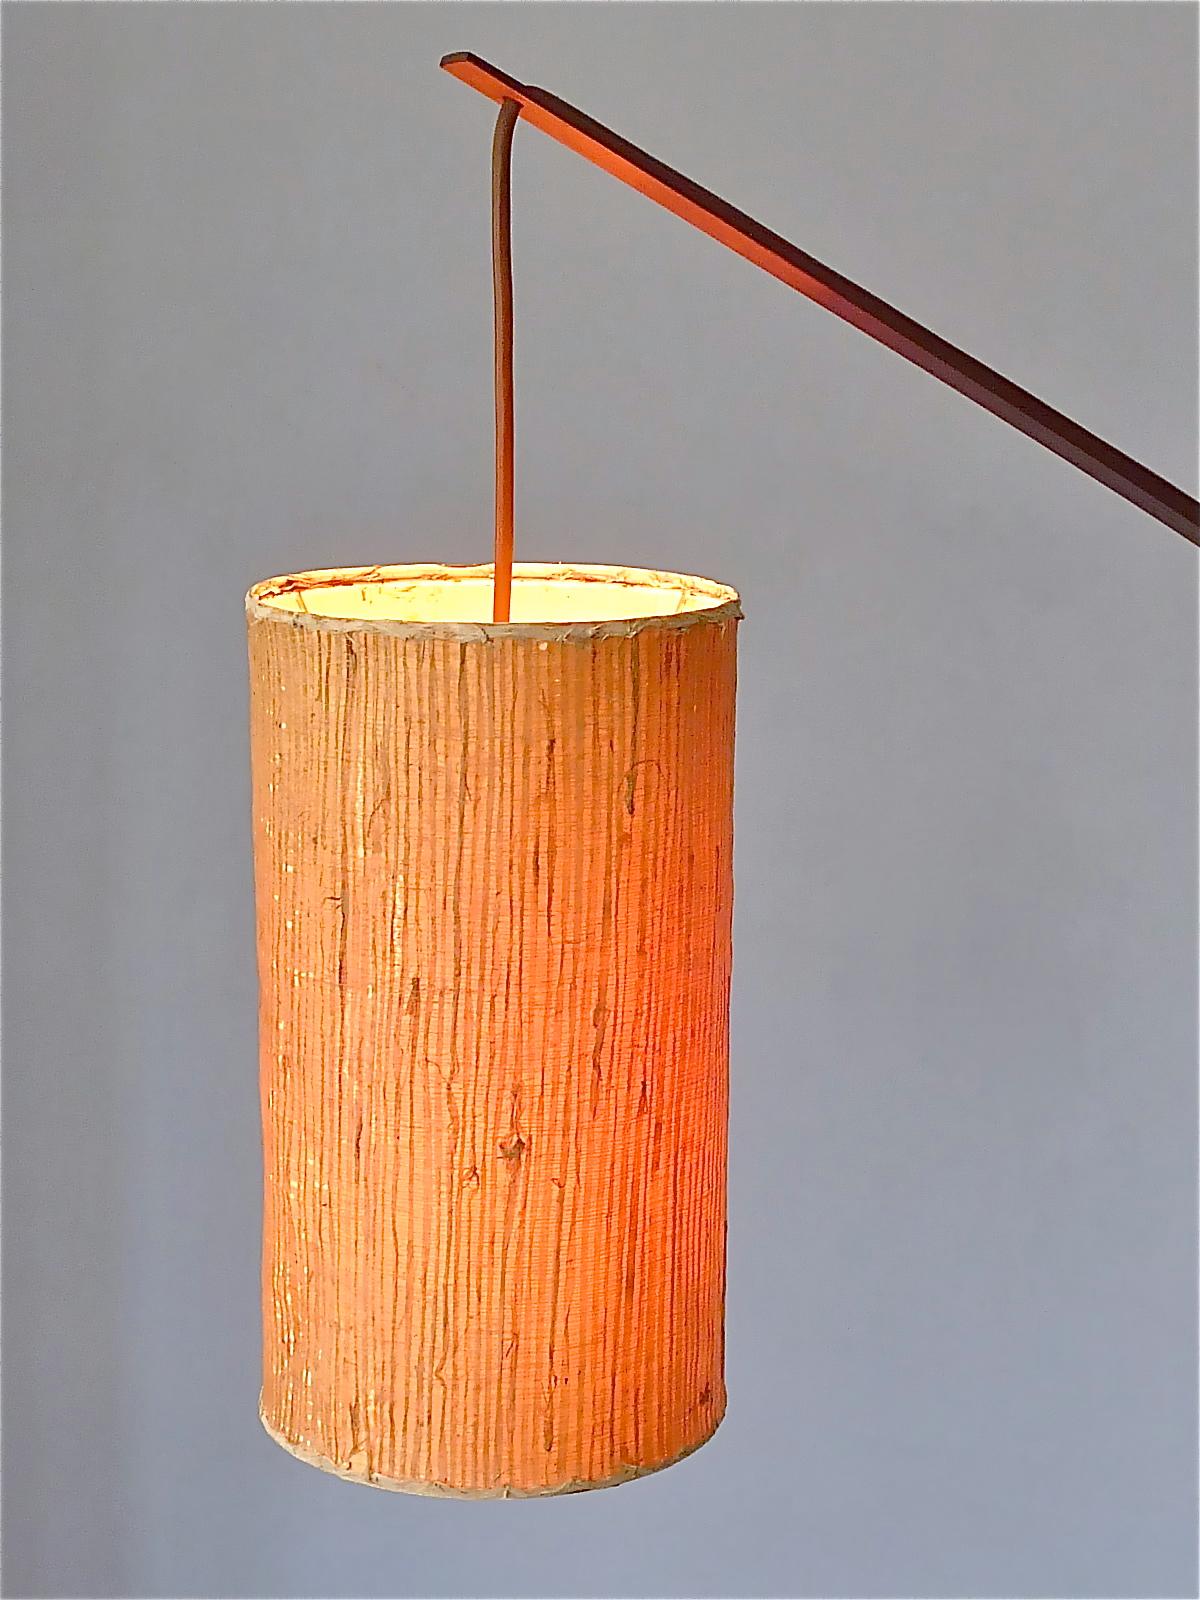 Monumental Teak Wall Lights Lamp by Rupprecht Skrip Coconut Counterweights 1950s For Sale 12